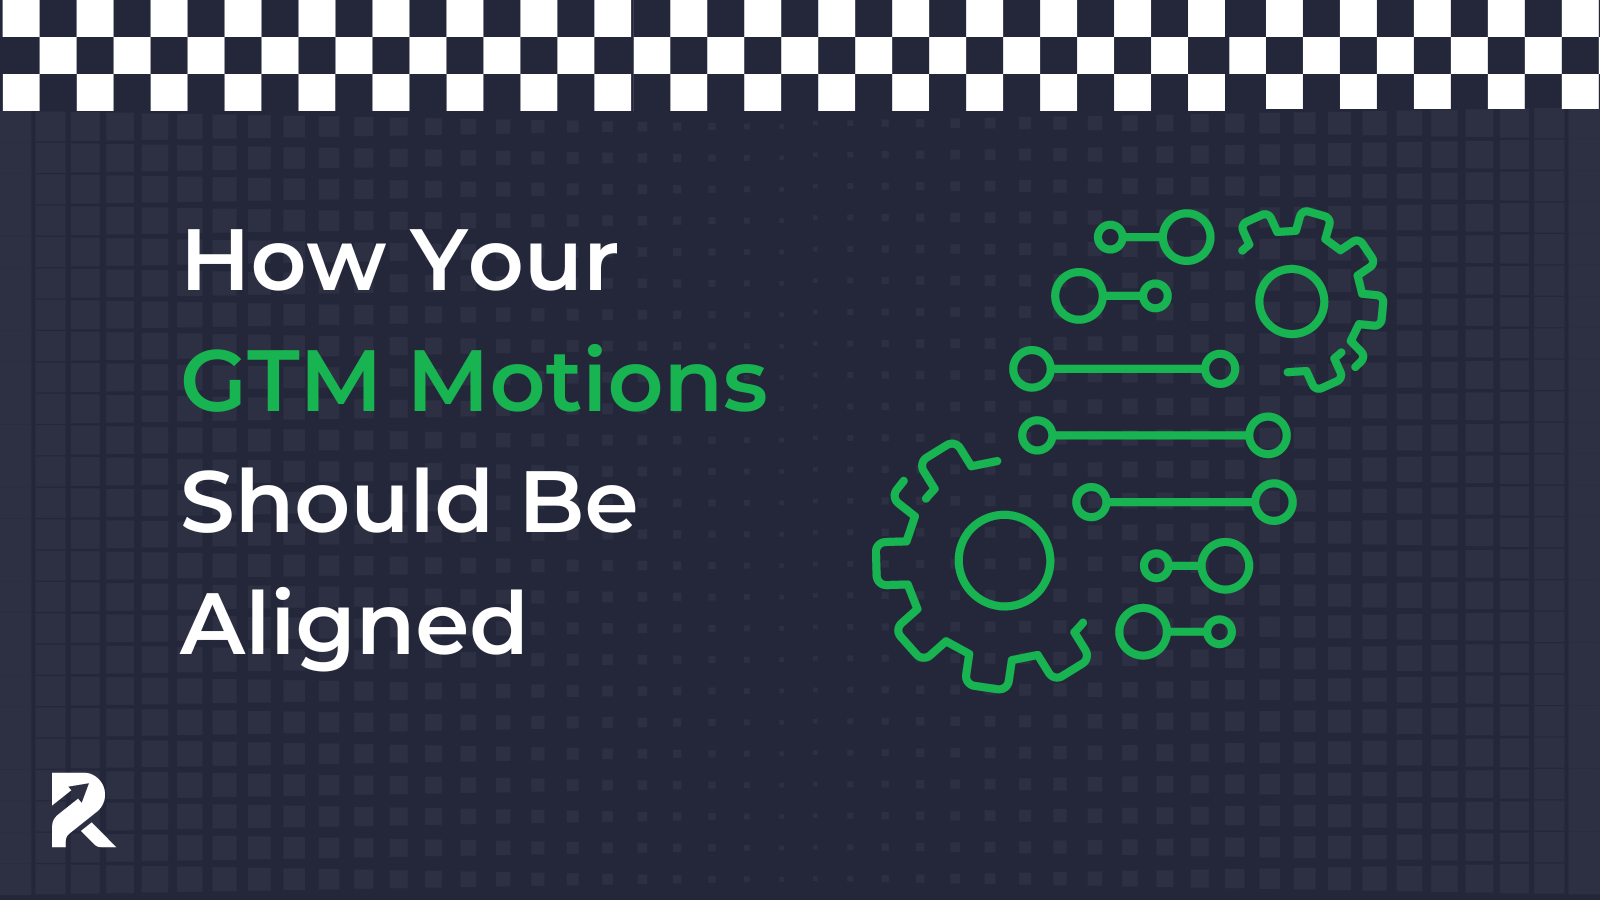 How Your GTM Motions Should Be Aligned